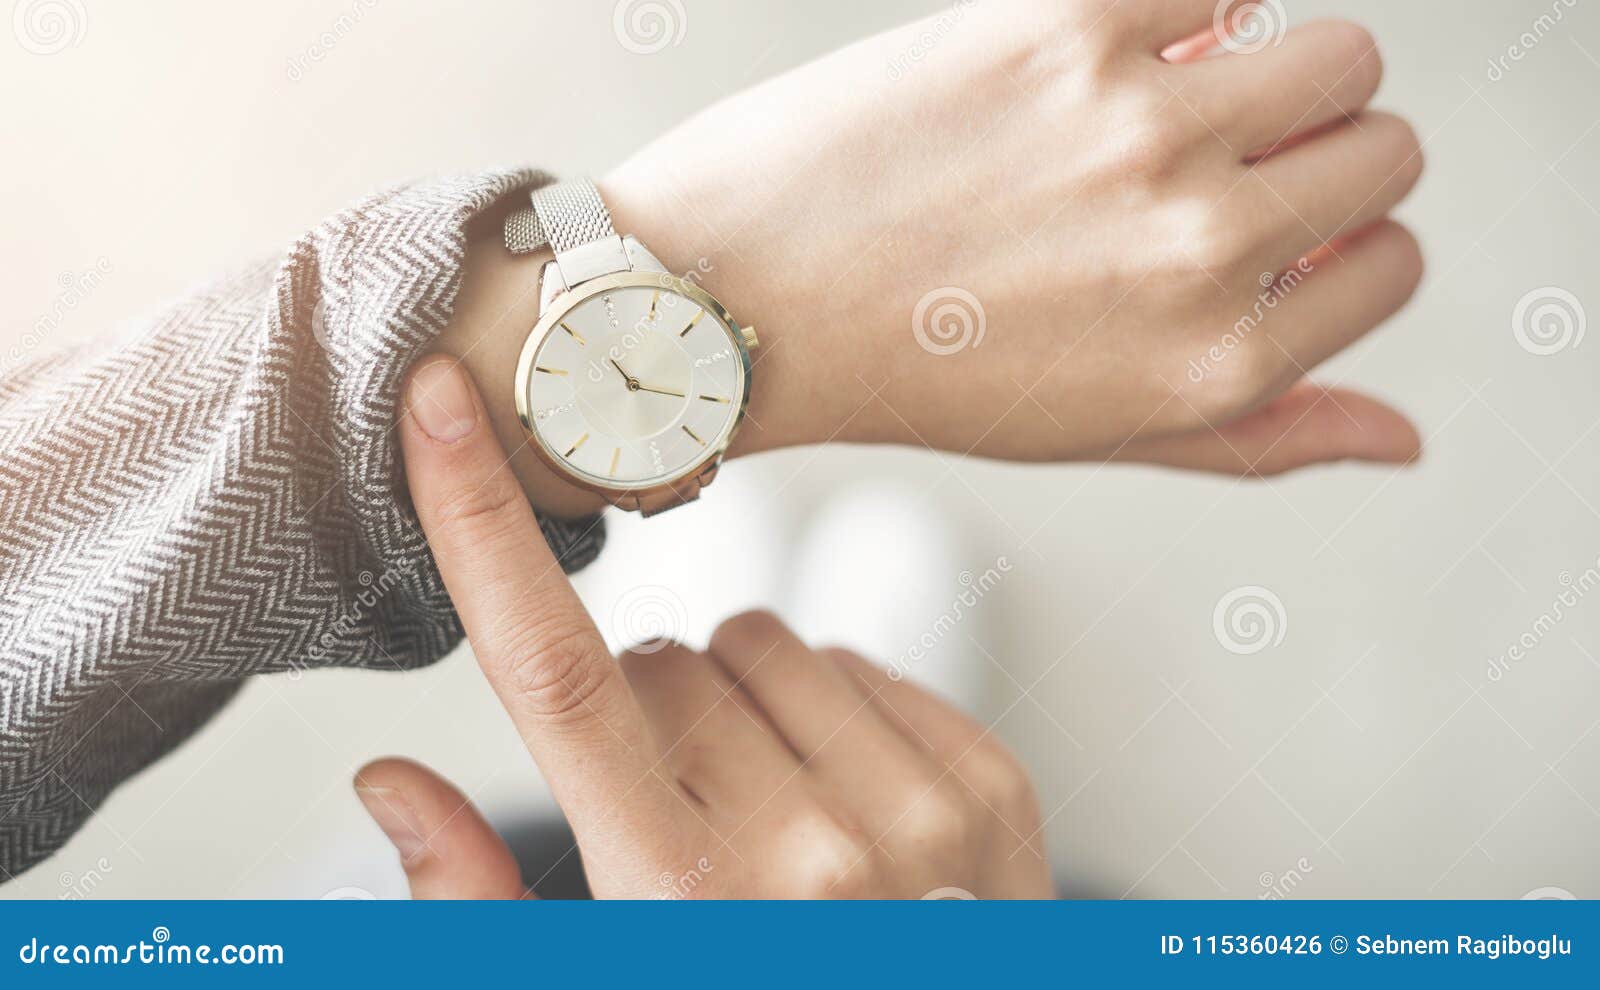 woman checking time her watch